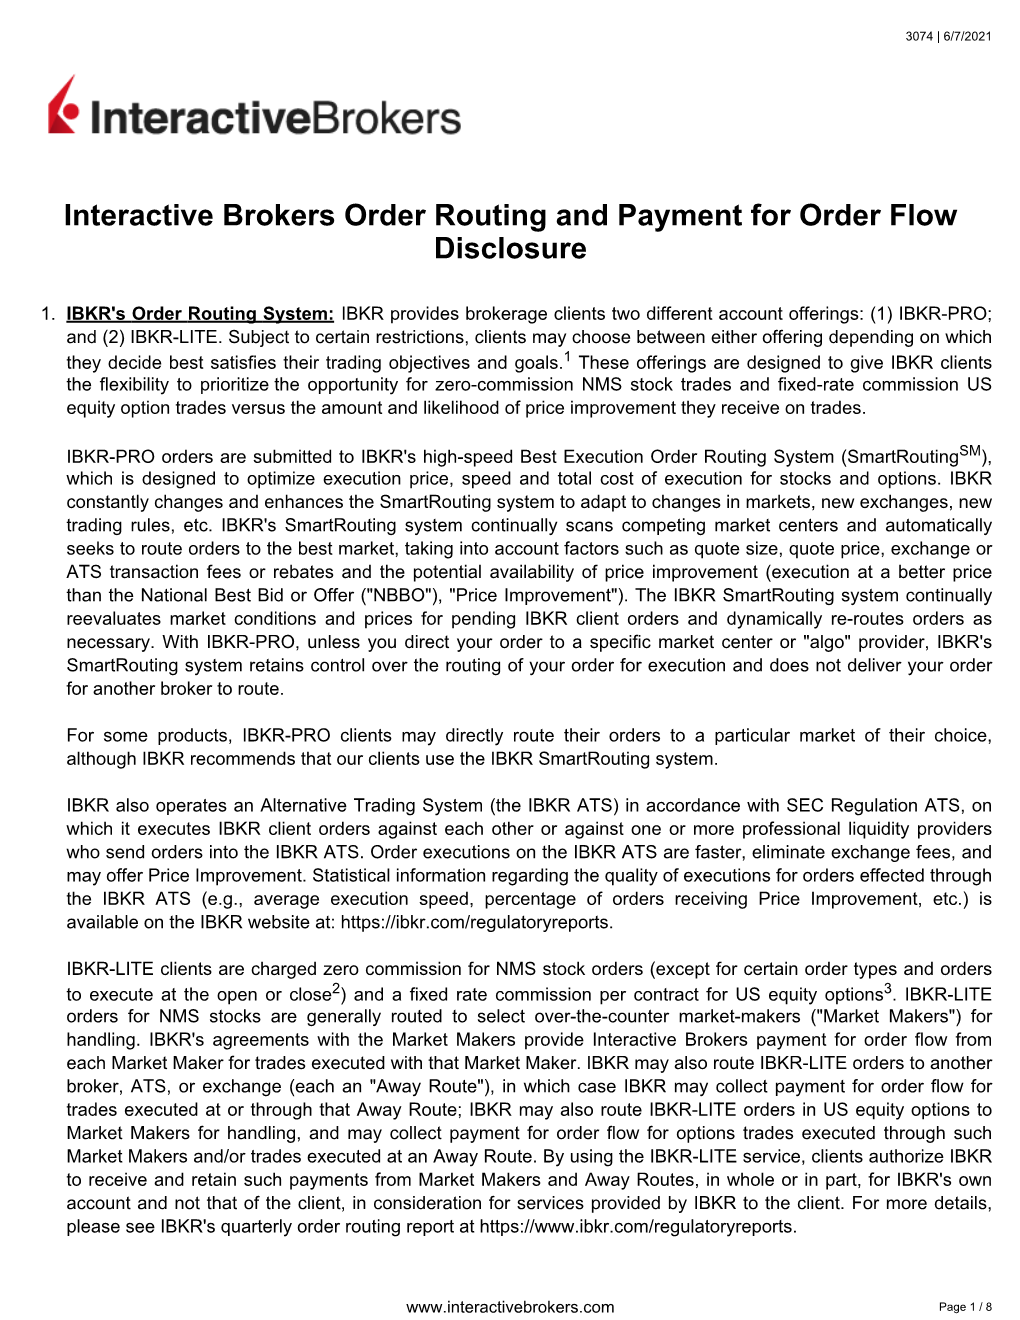 Interactive Brokers Order Routing and Payment for Order Flow Disclosure